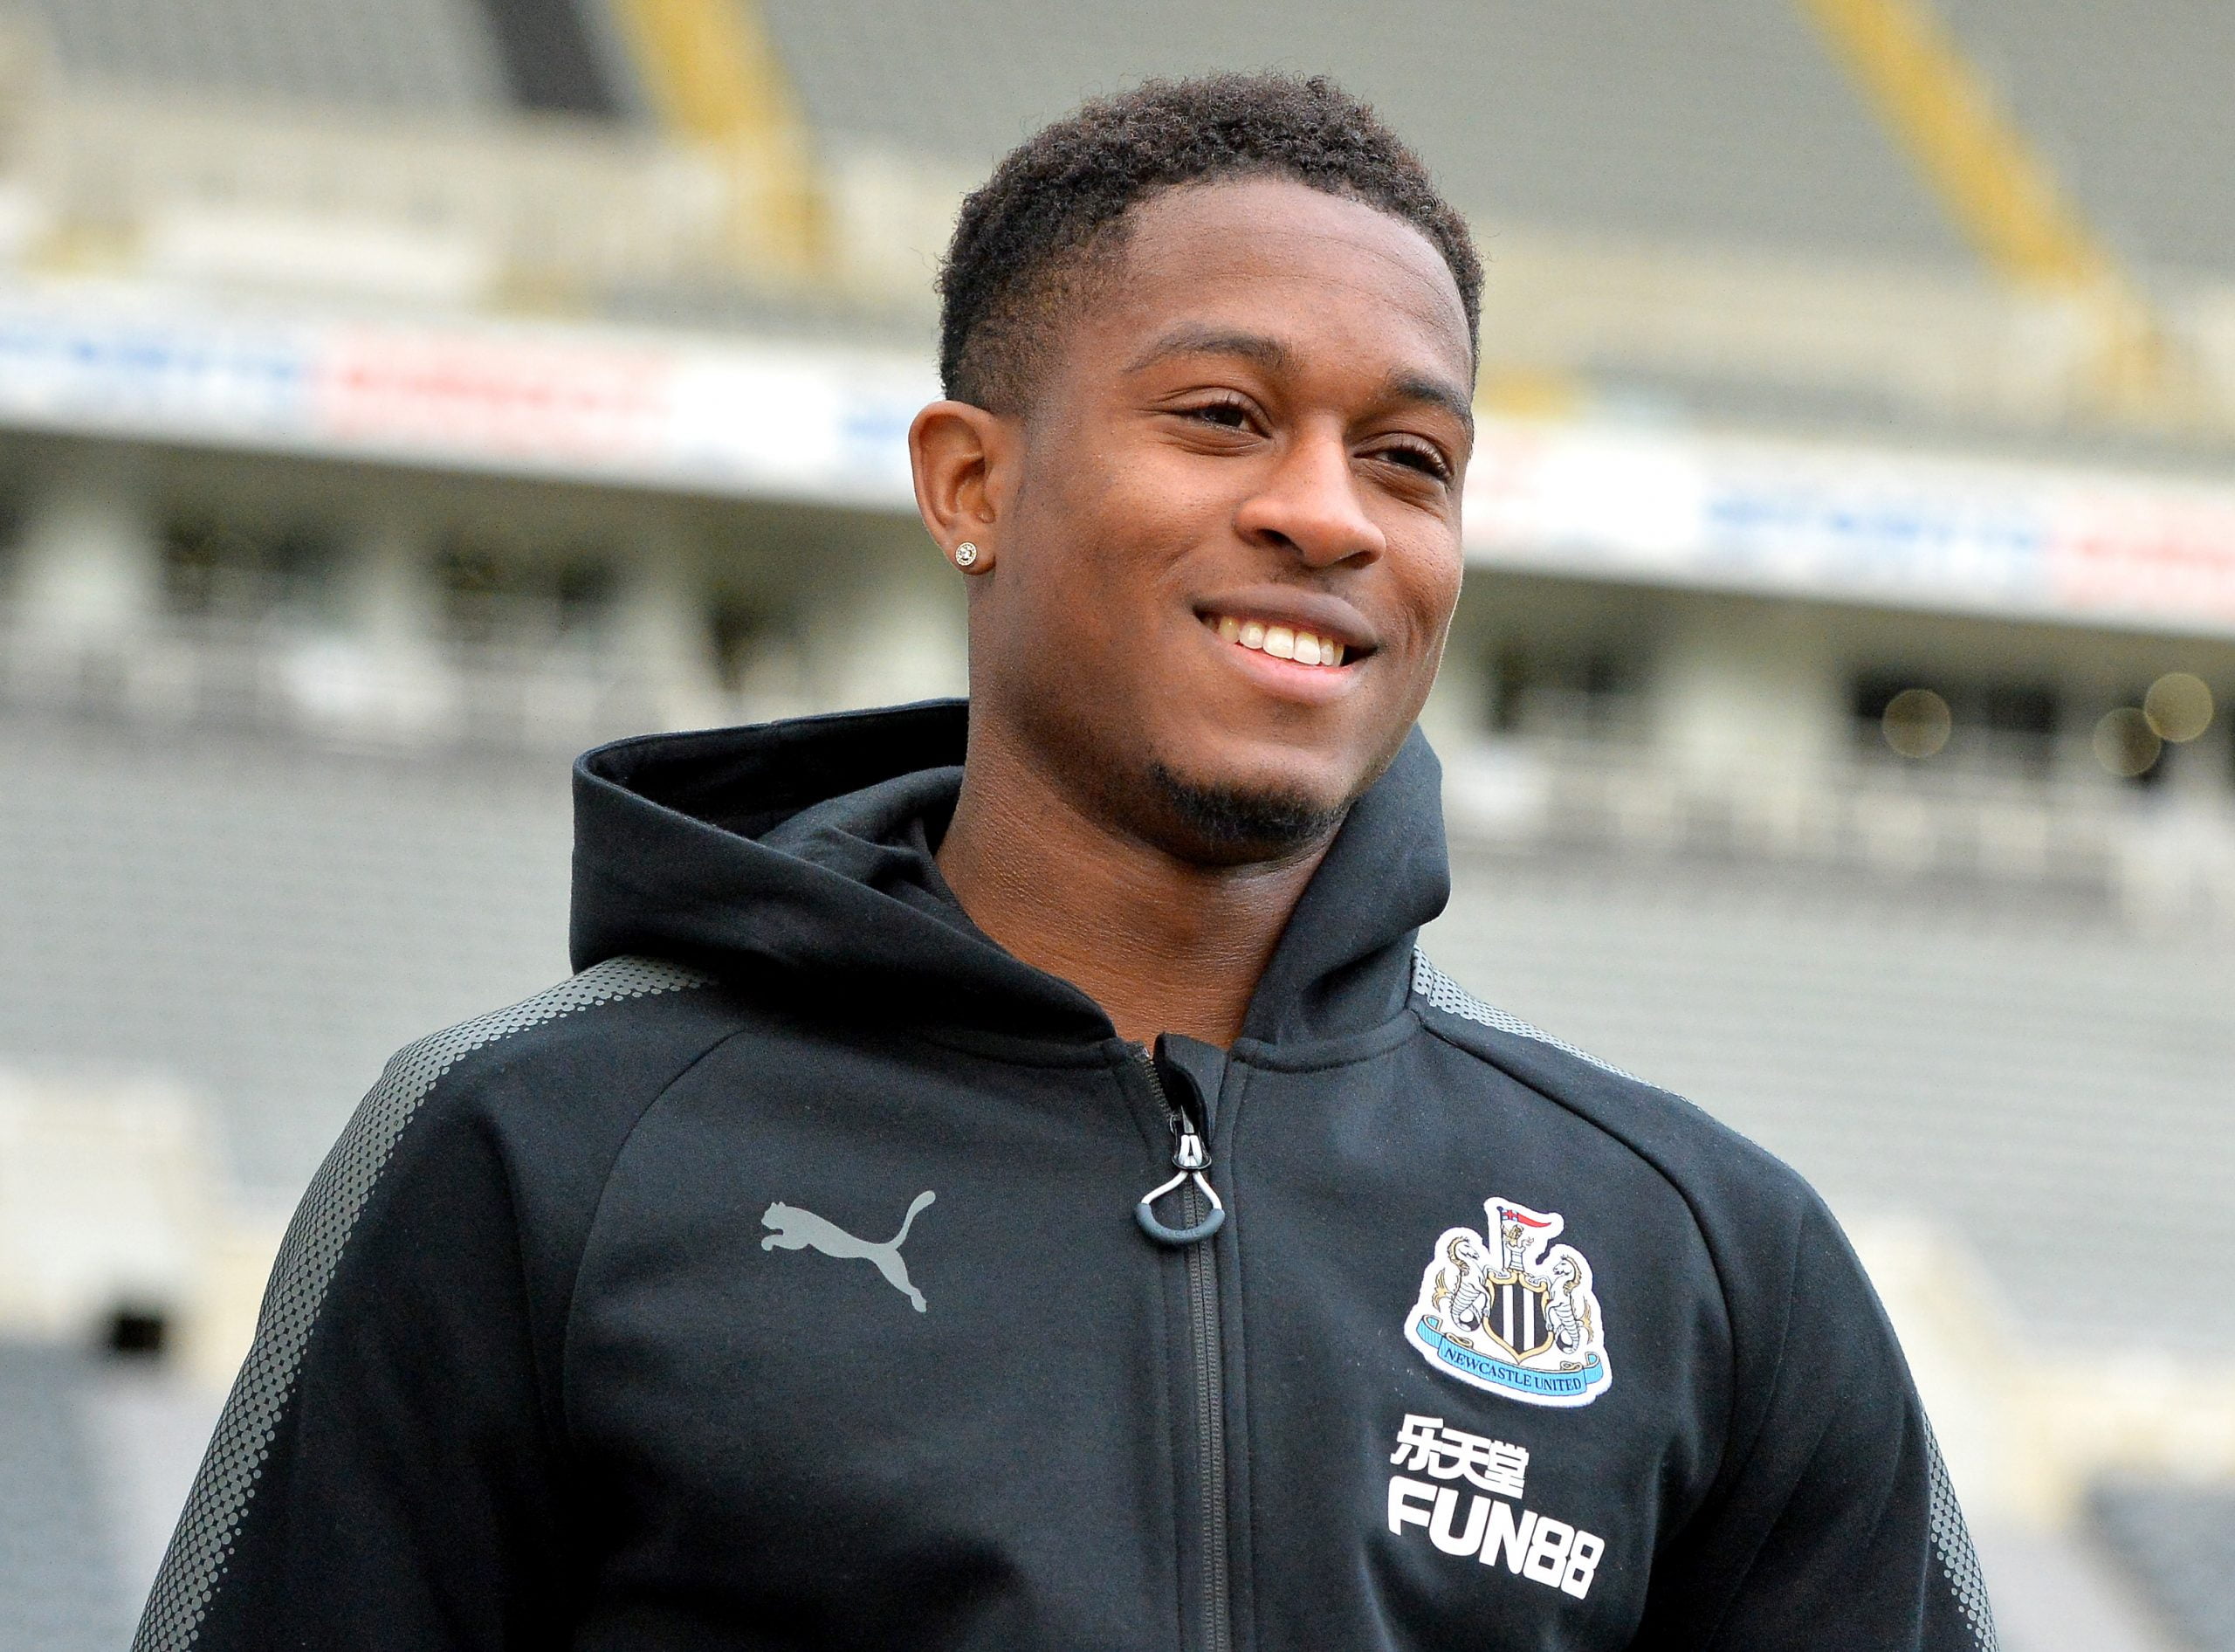 NEWCASTLE UPON TYNE, ENGLAND - NOVEMBER 25:  Rolando Aarons of Newcastle United arrives at the stadium prior to the Premier League match between Newcastle United and Watford at St. James Park on November 25, 2017 in Newcastle upon Tyne, England.  (Photo by Mark Runnacles/Getty Images)